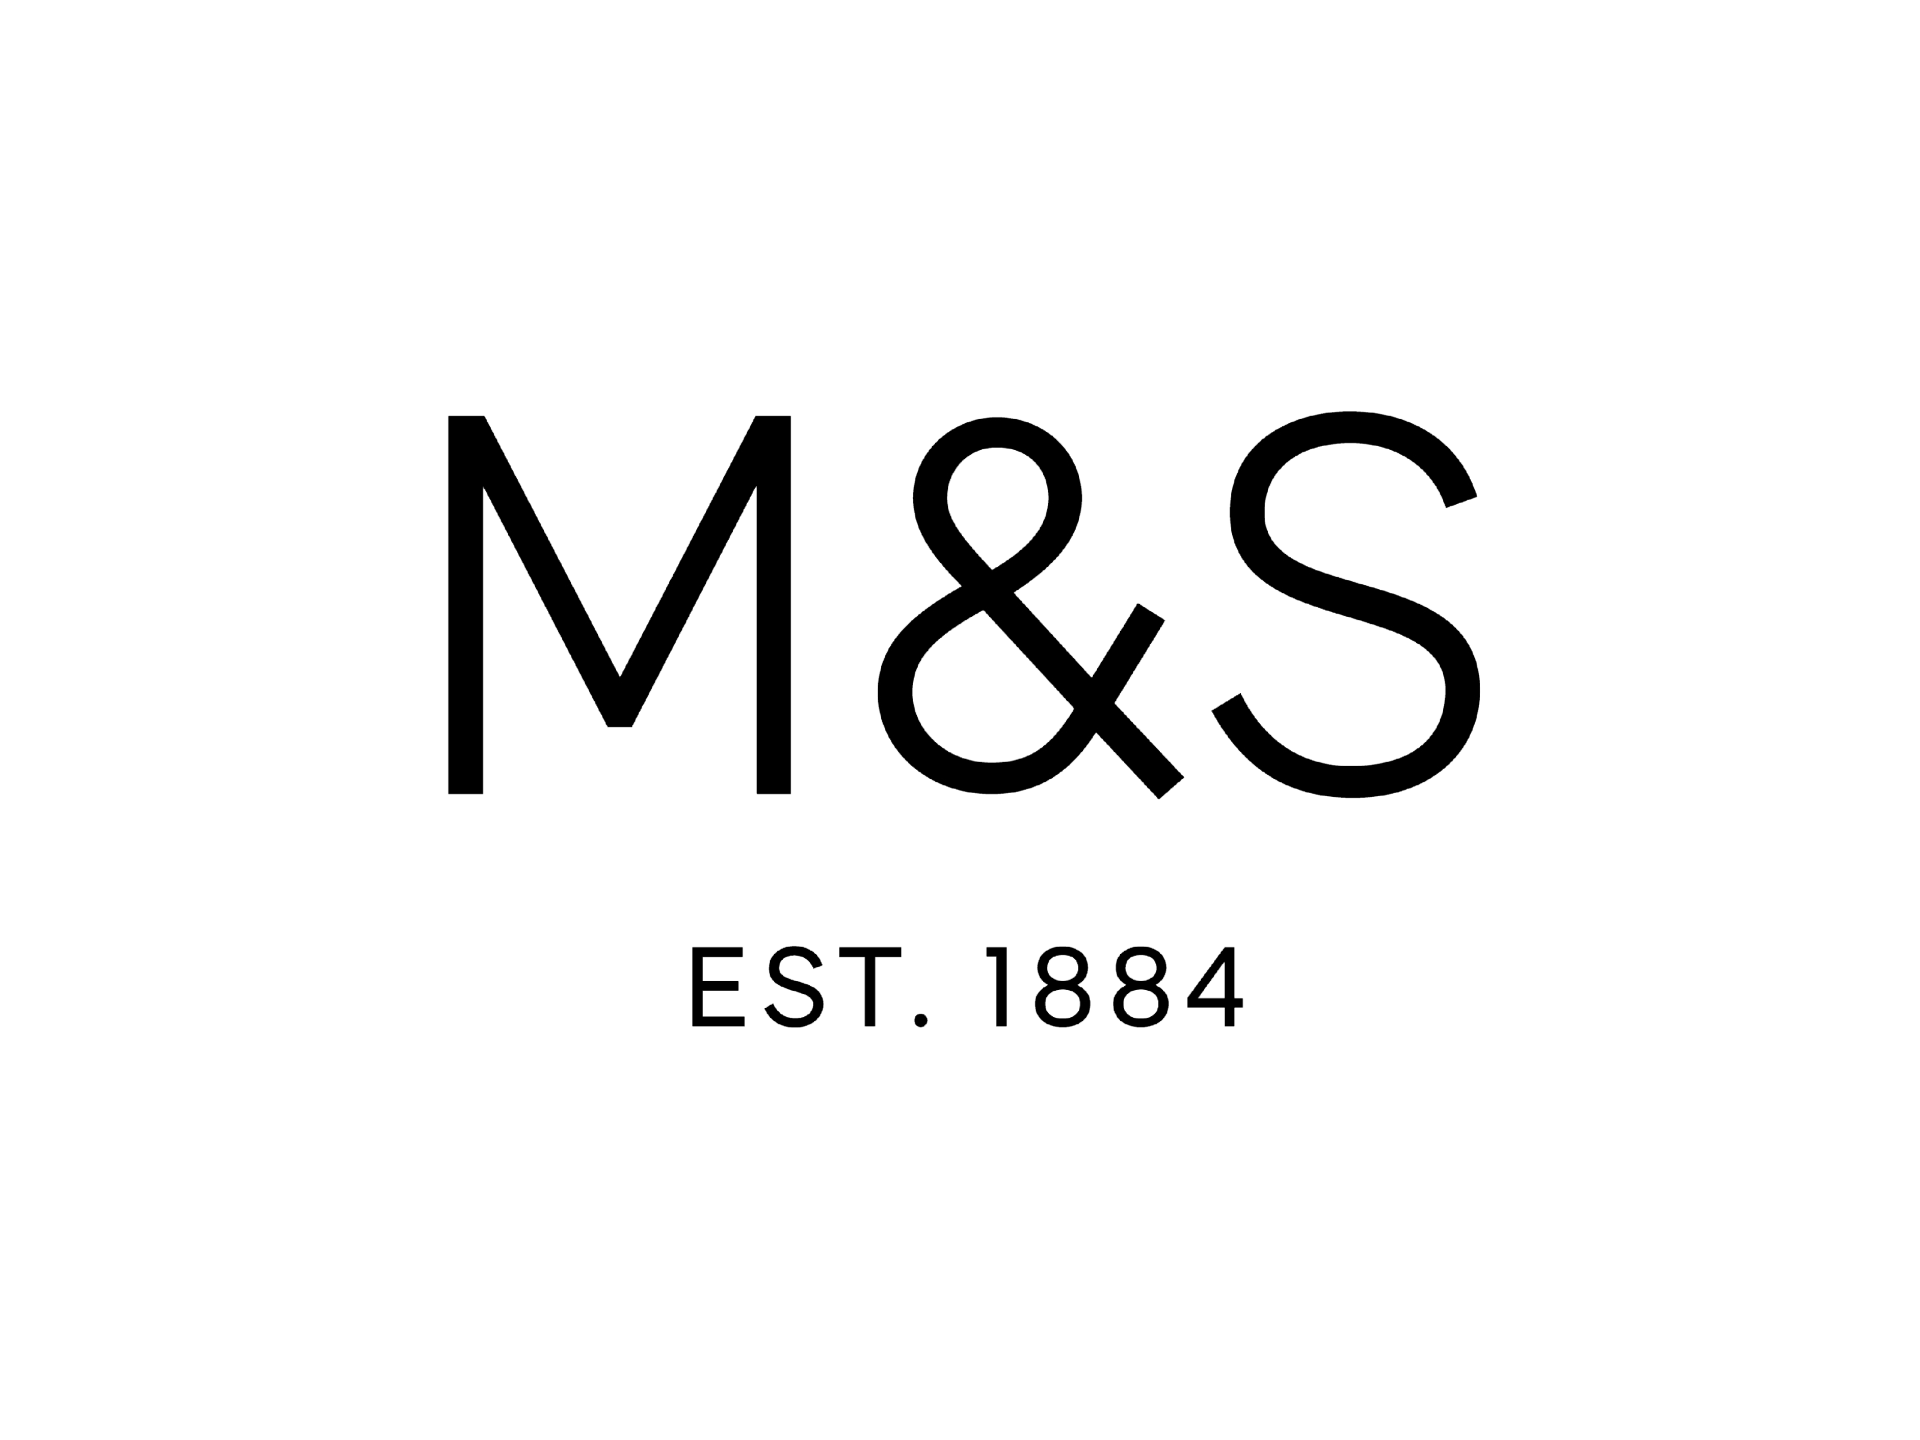 the m & s logo is black and white and was established in 1884 .